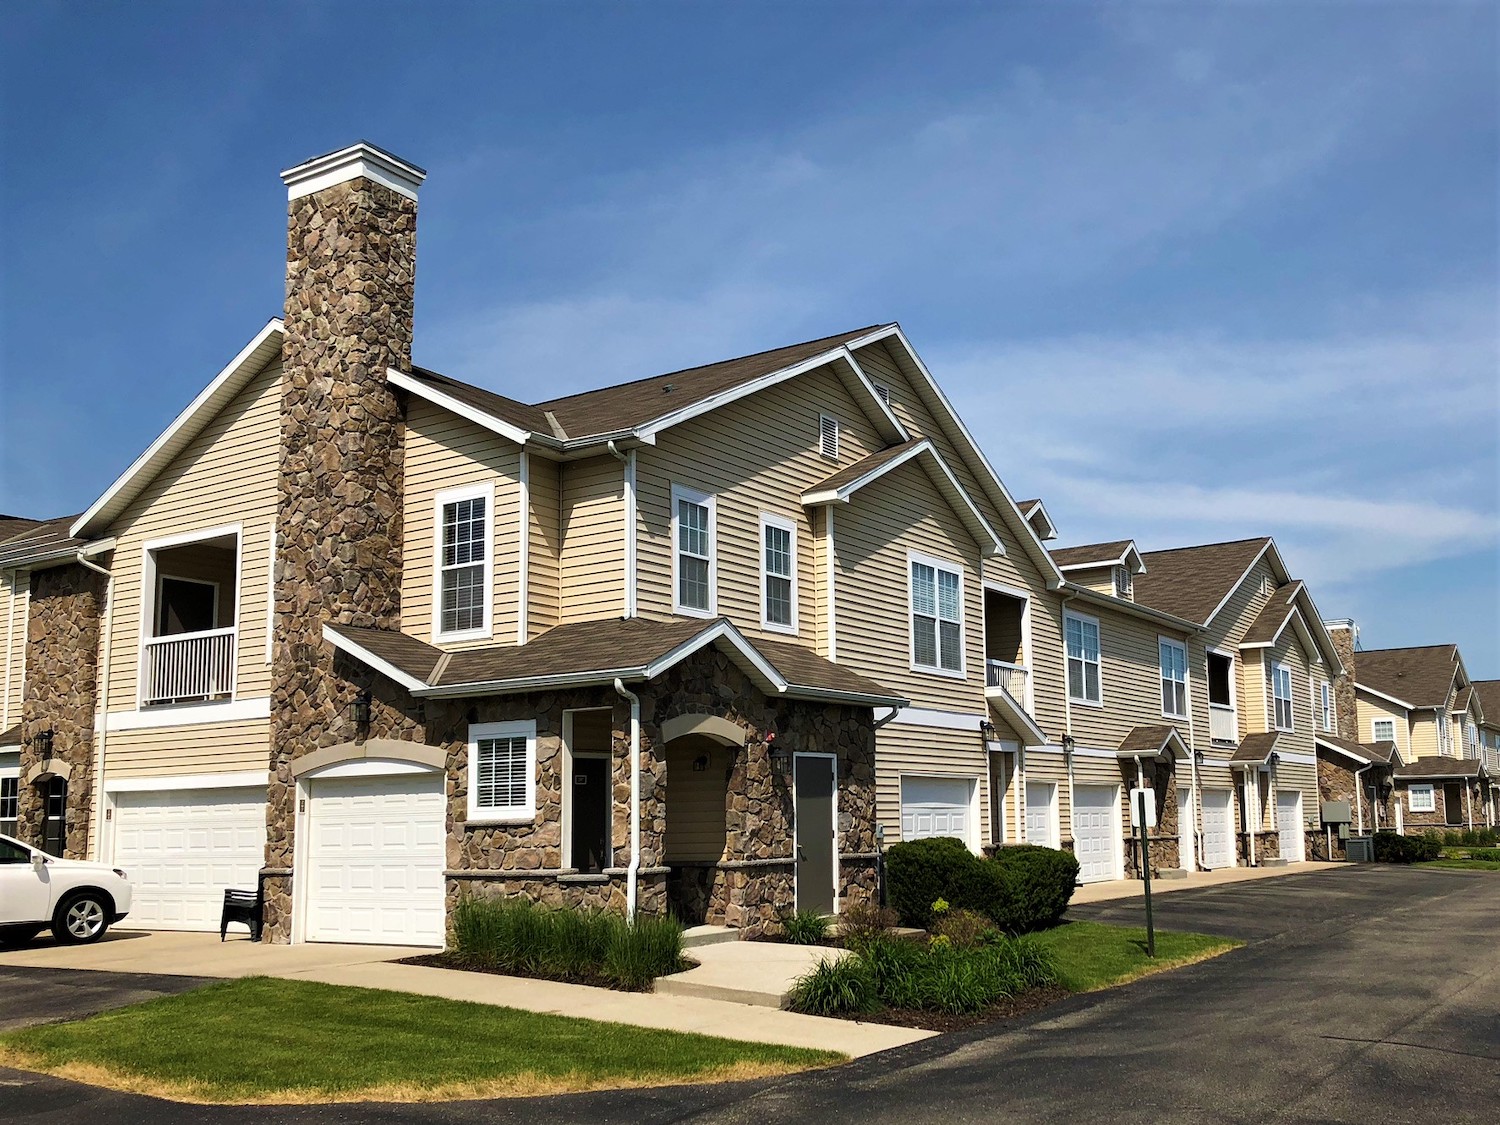 Syndicated Equities Sells Michigan Multifamily Property for $71.5 Million